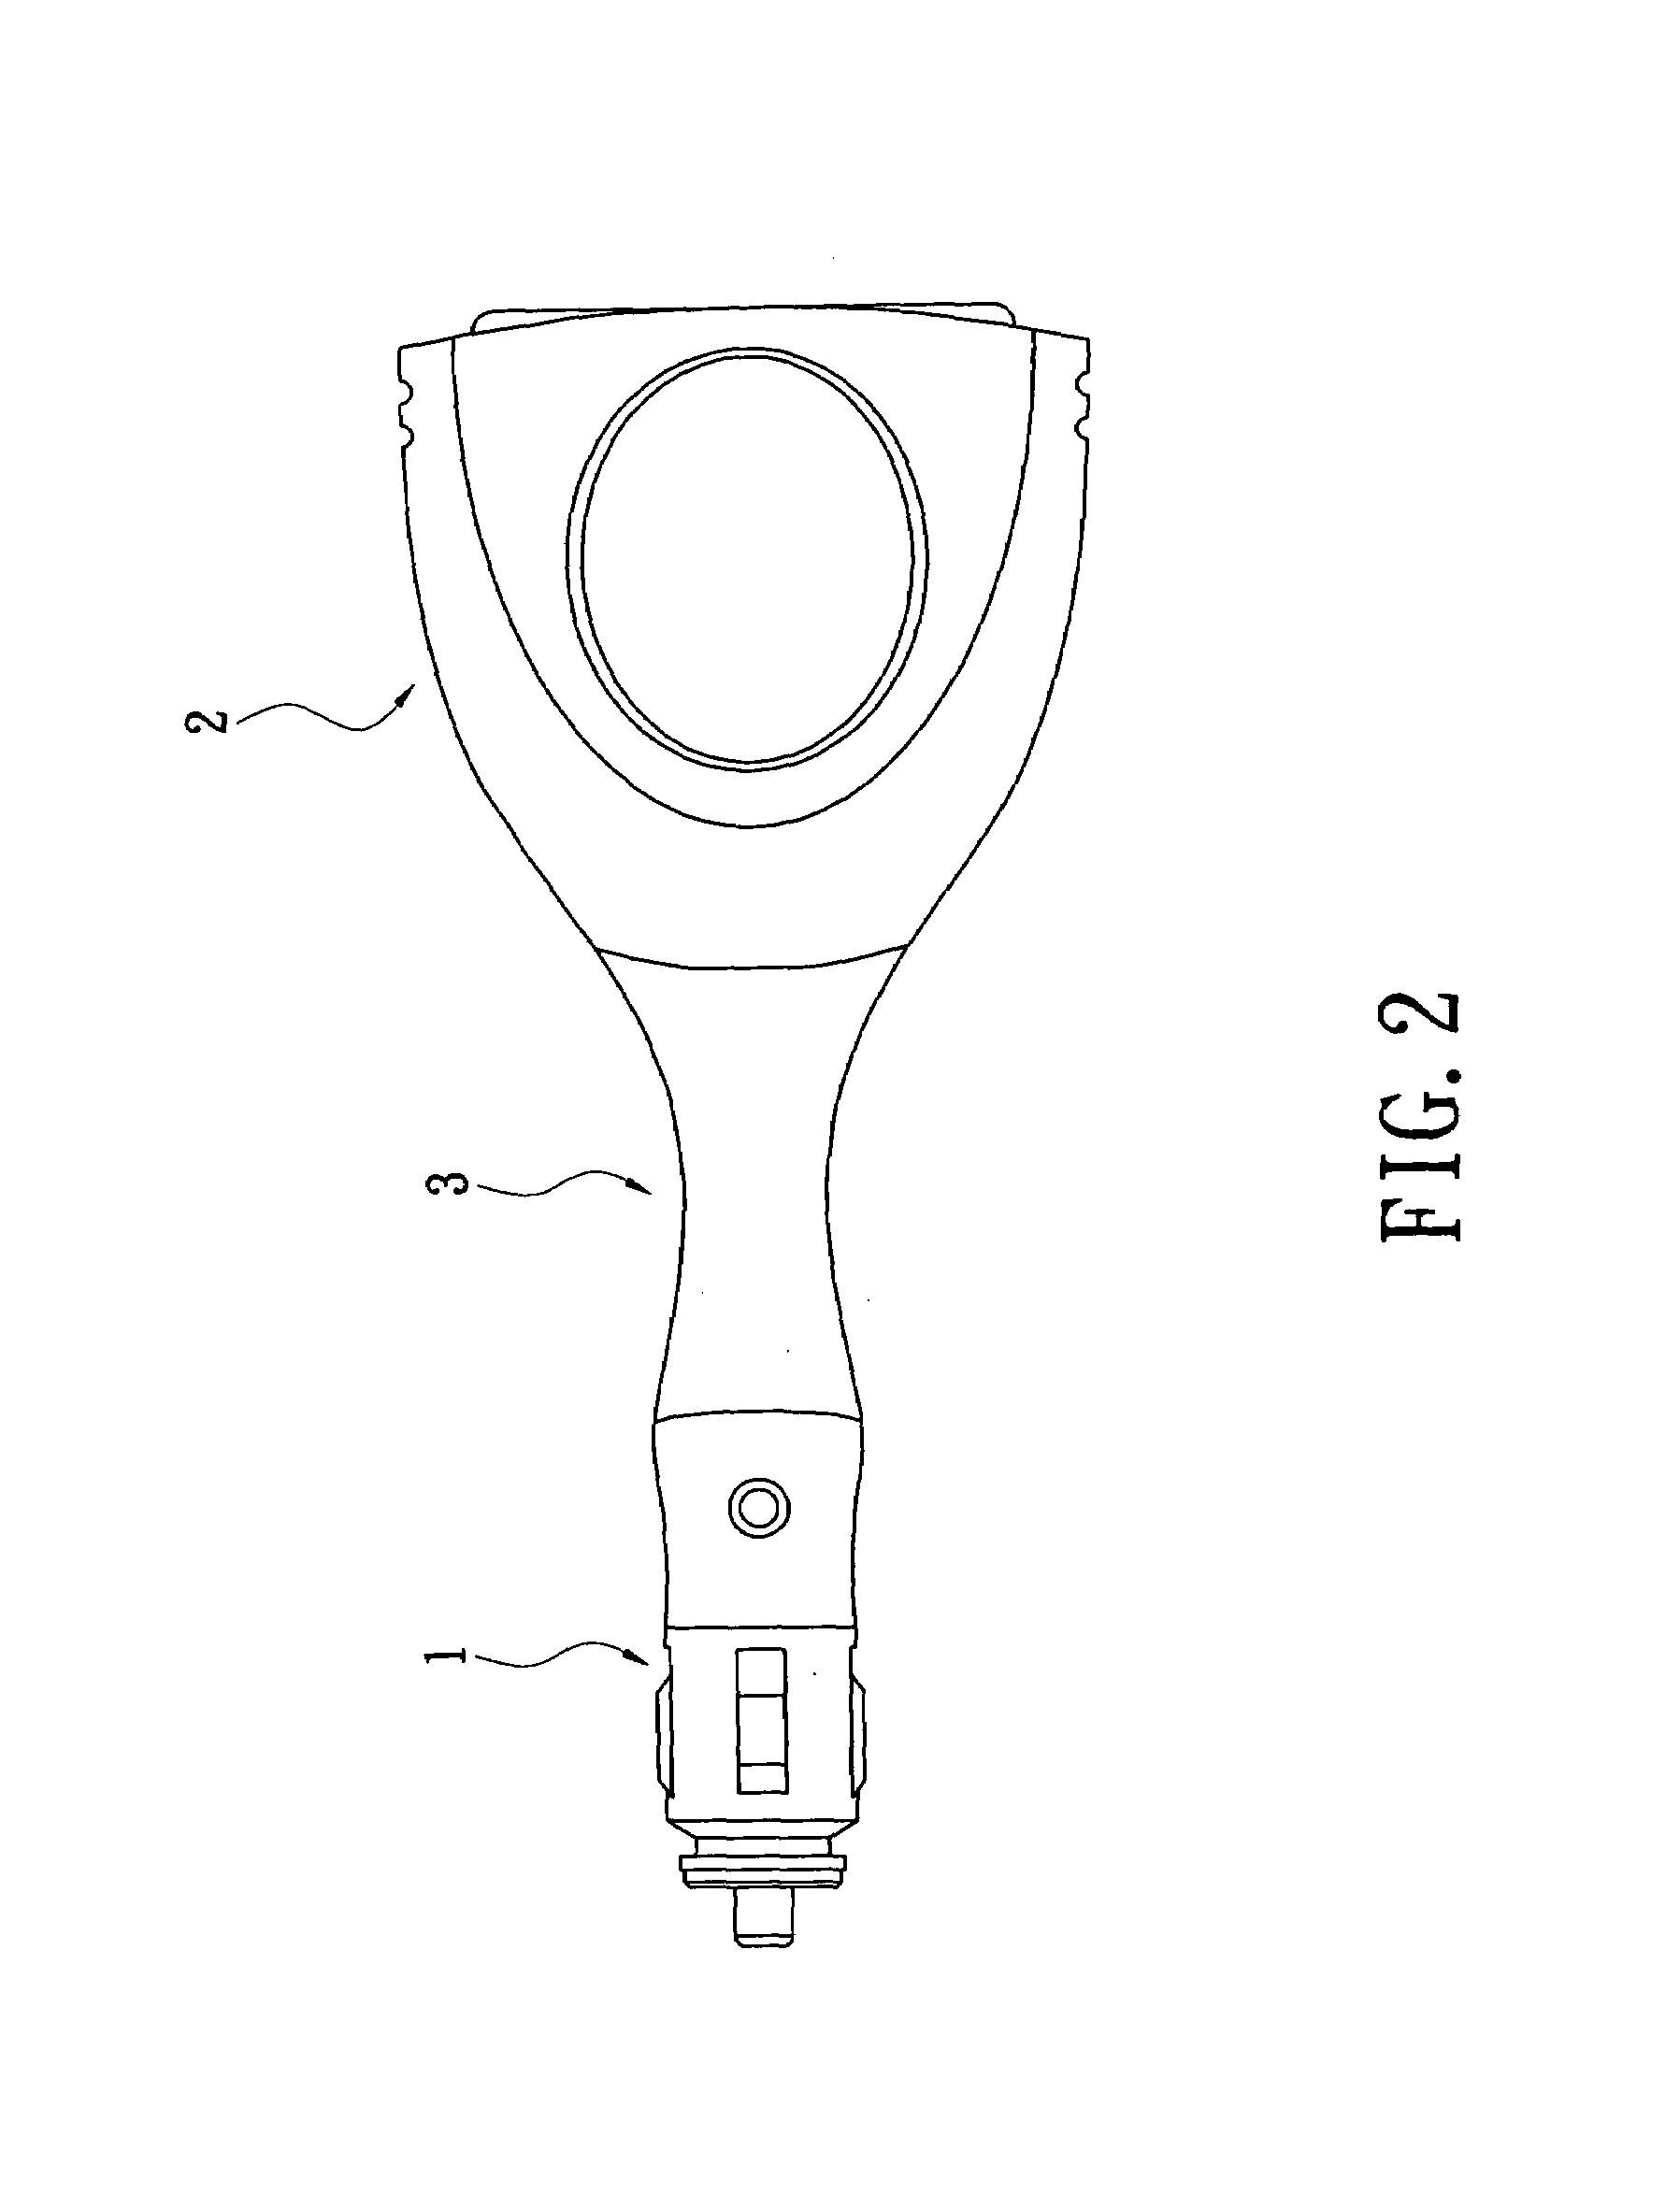 Adapter for an automobile socket